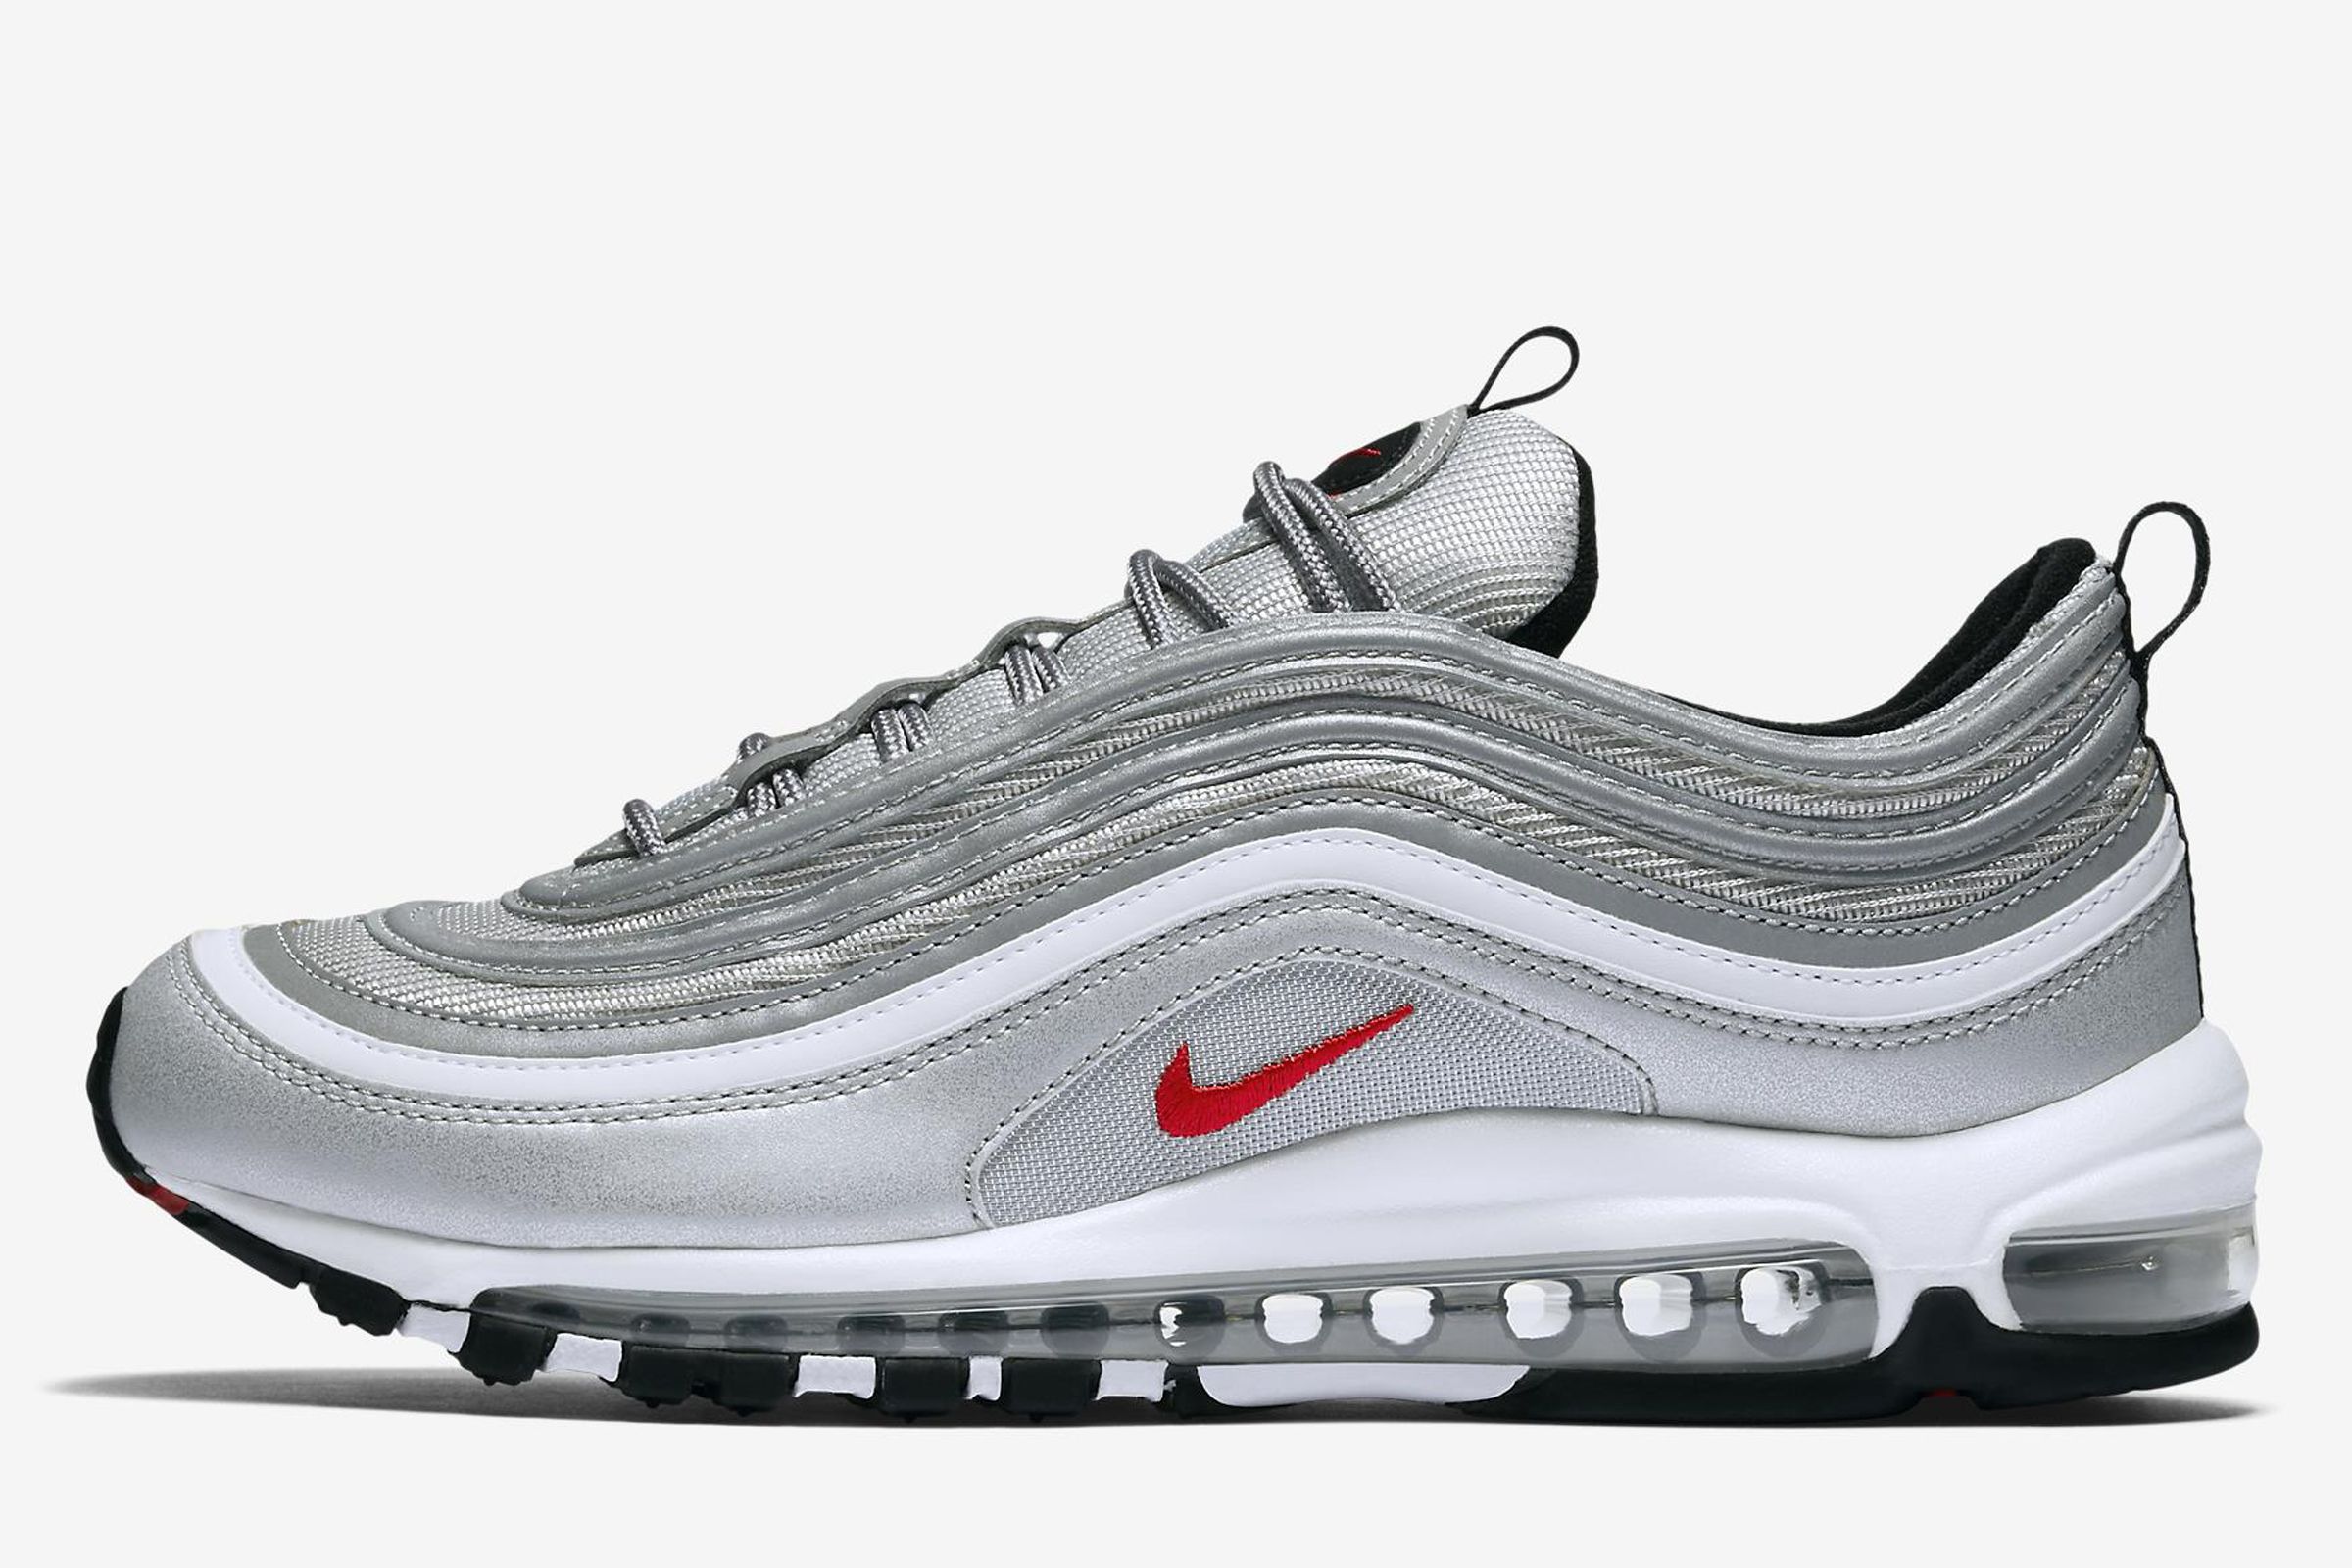 First Look: Supreme x Nike Air Max 96 'Silver Bullet' On Foot